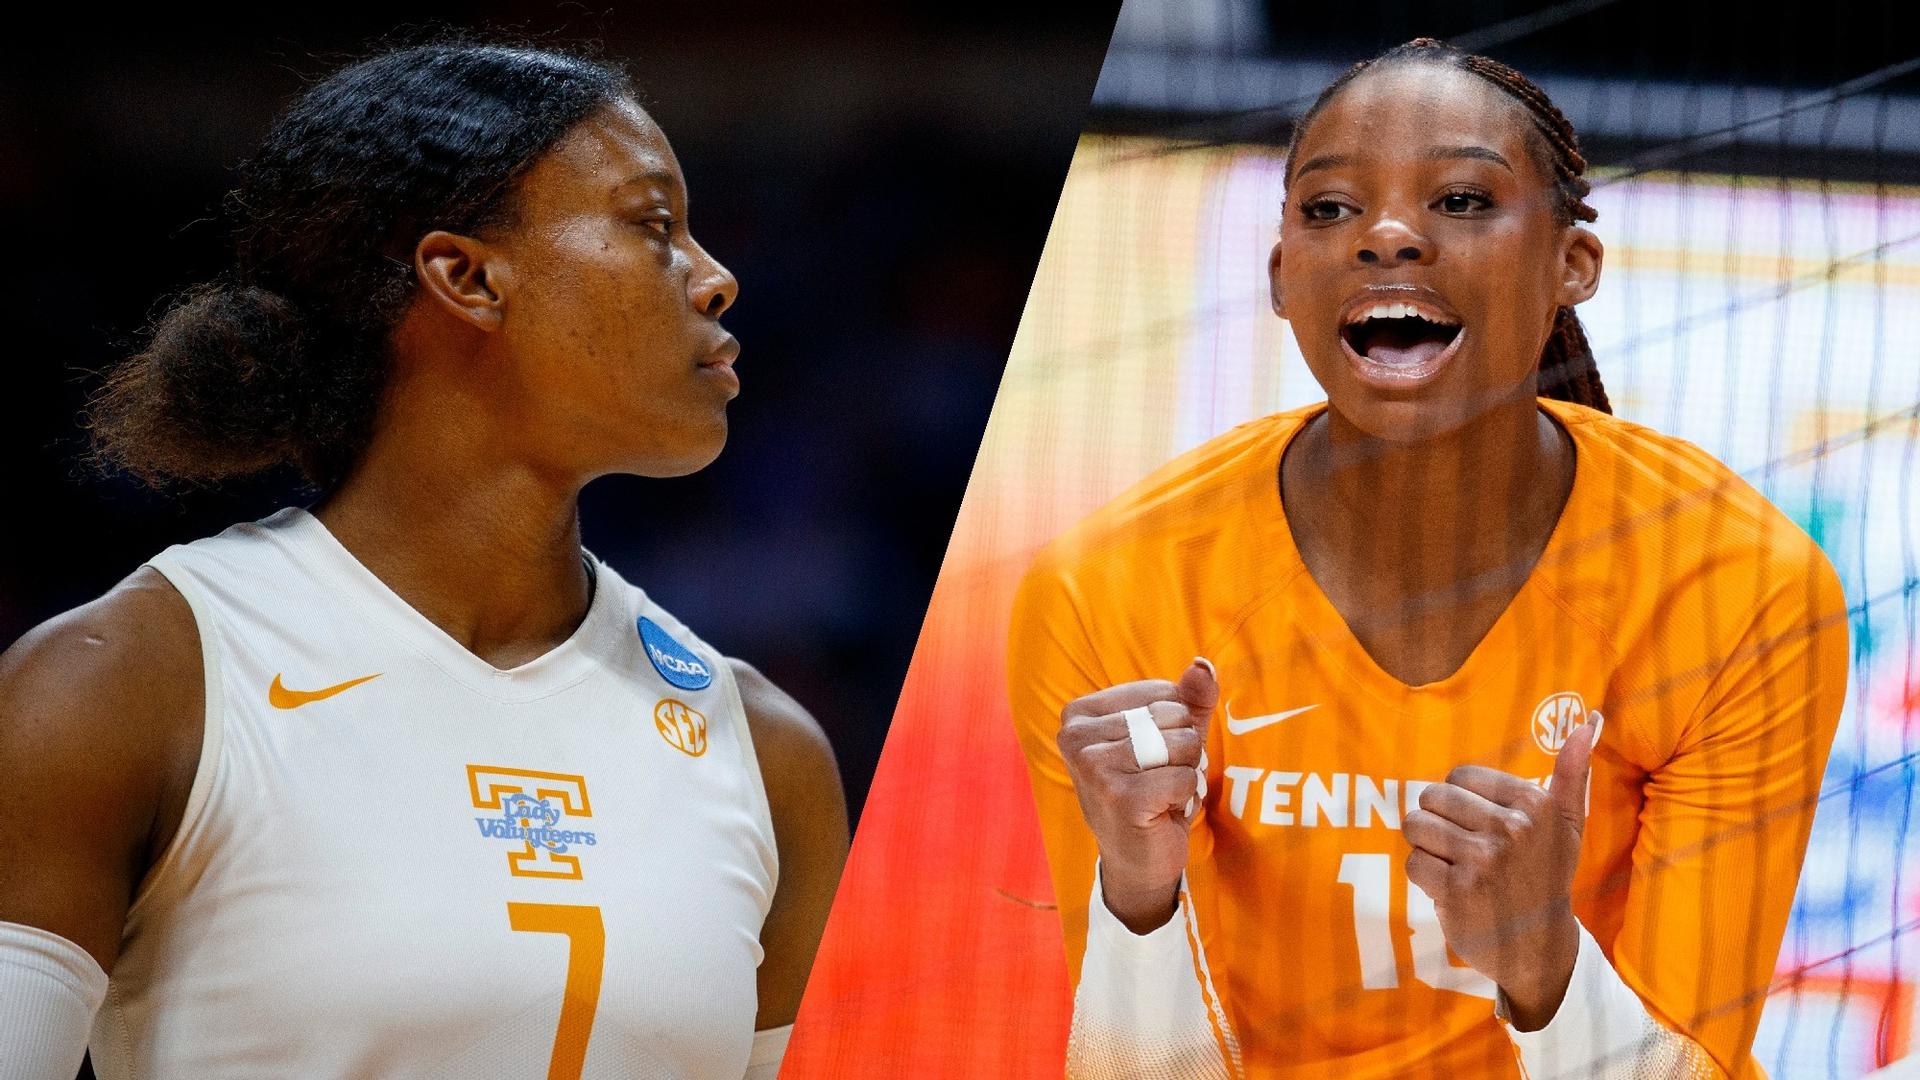 Two Lady Vols Selected in the Inaugural Pro Volleyball Federation Draft